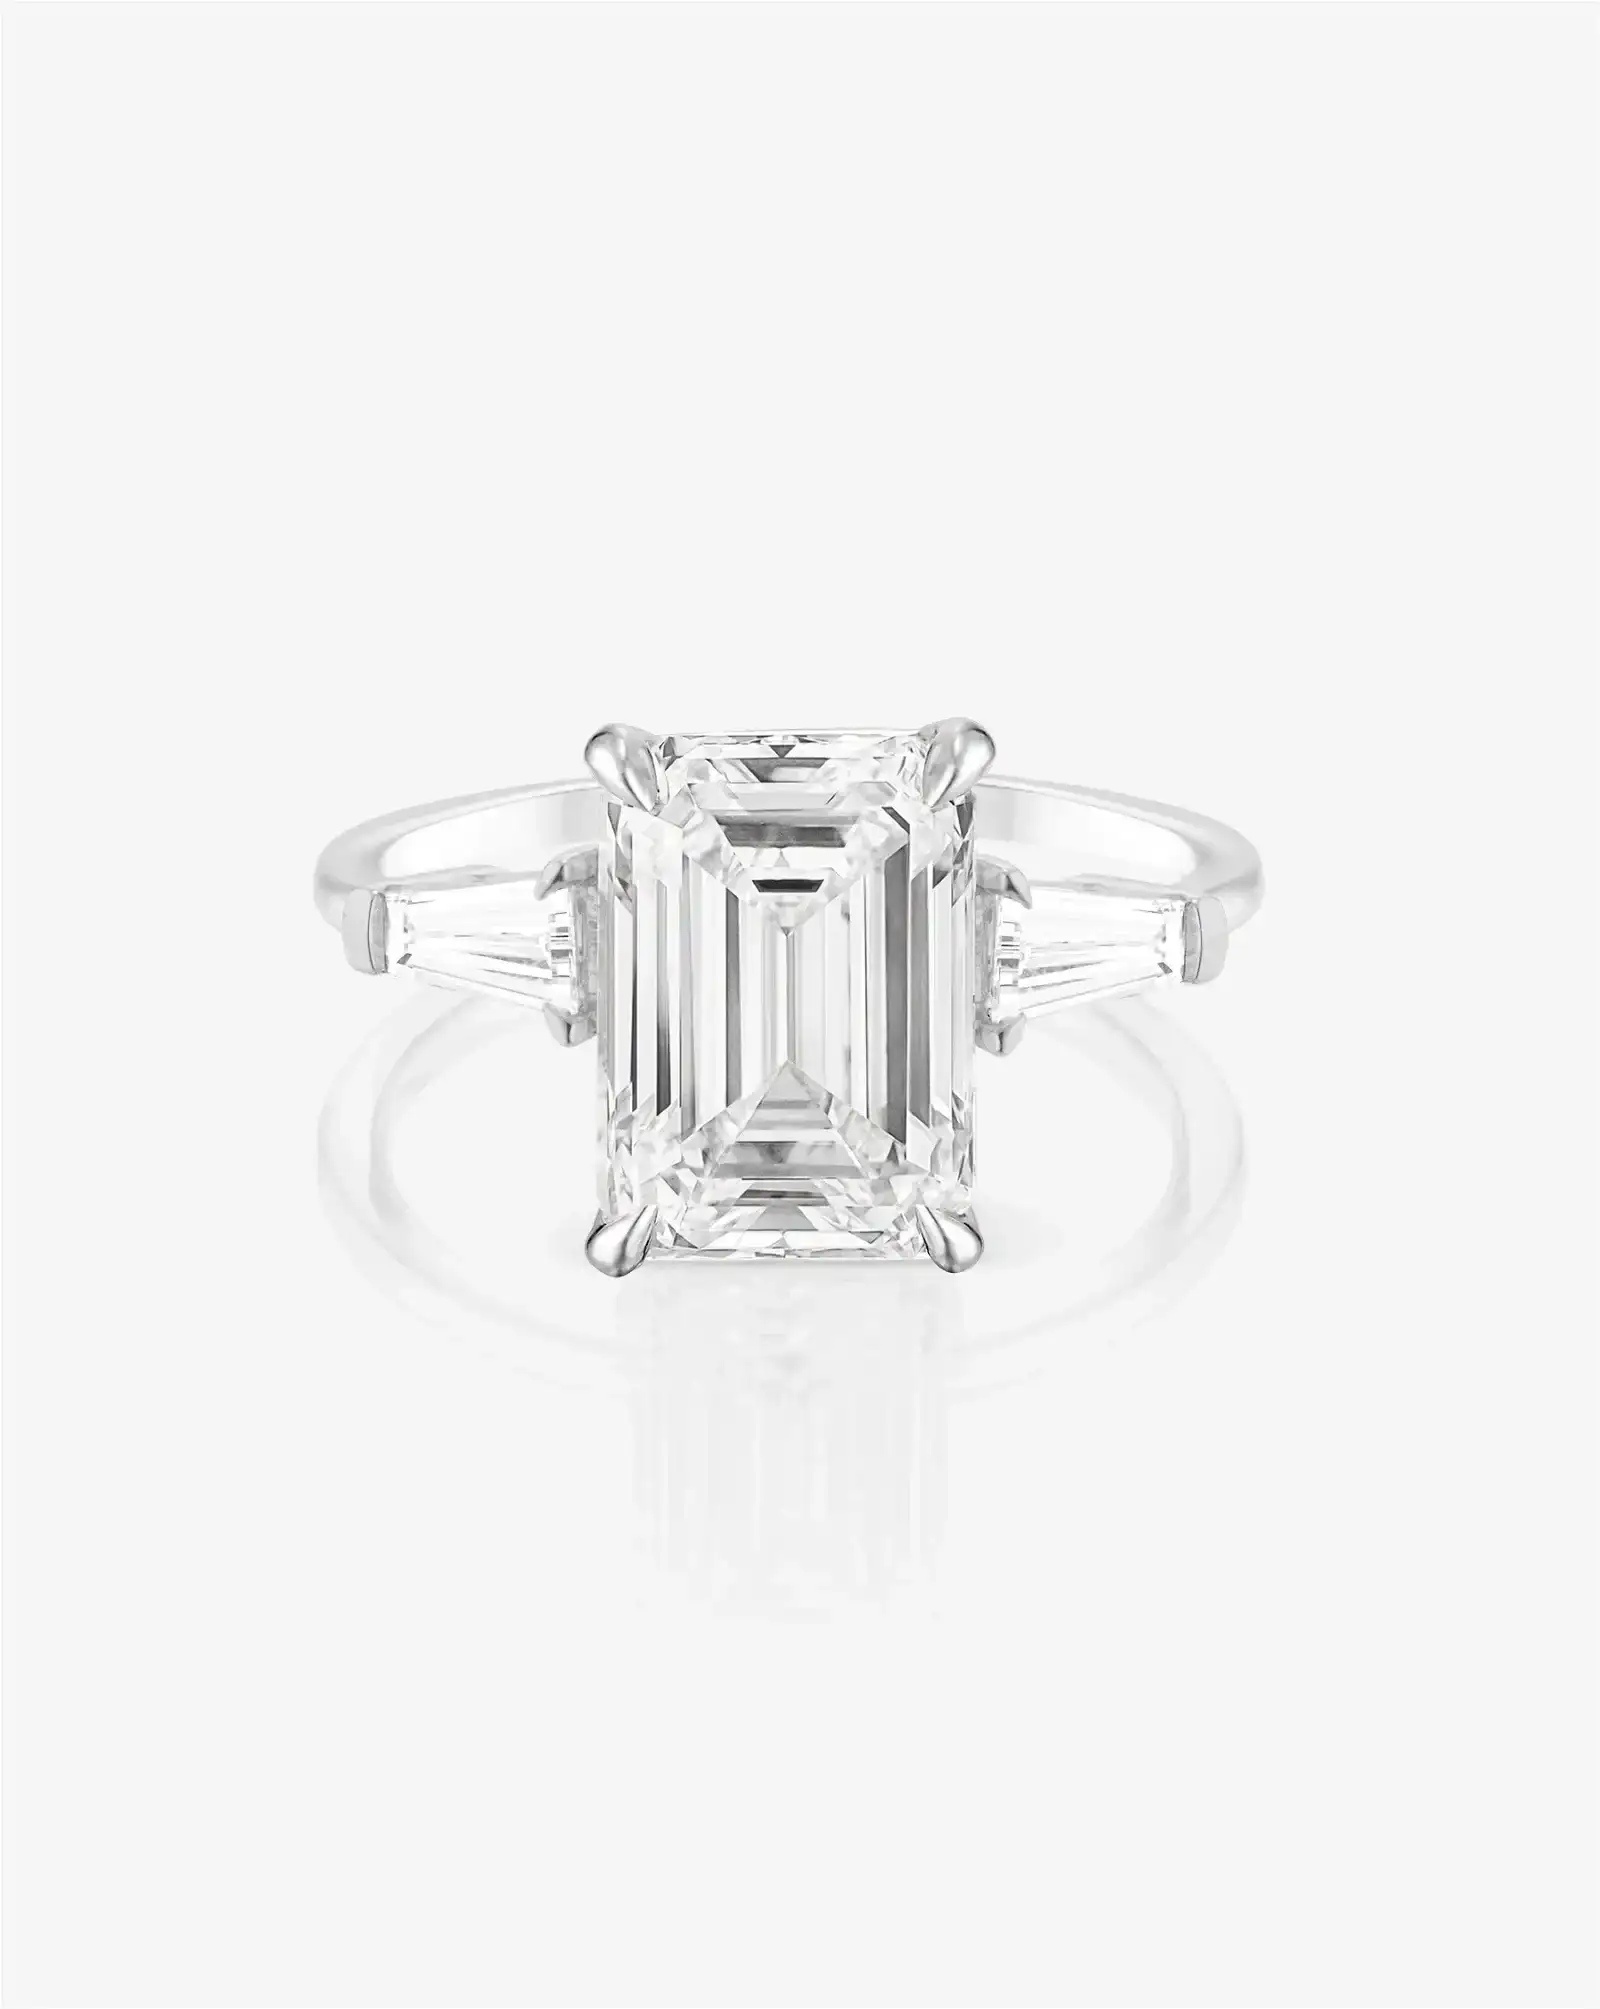 Image of 3.09 Emerald Cut in the Whisper Thin® Three Stone with Tapered Baguettes